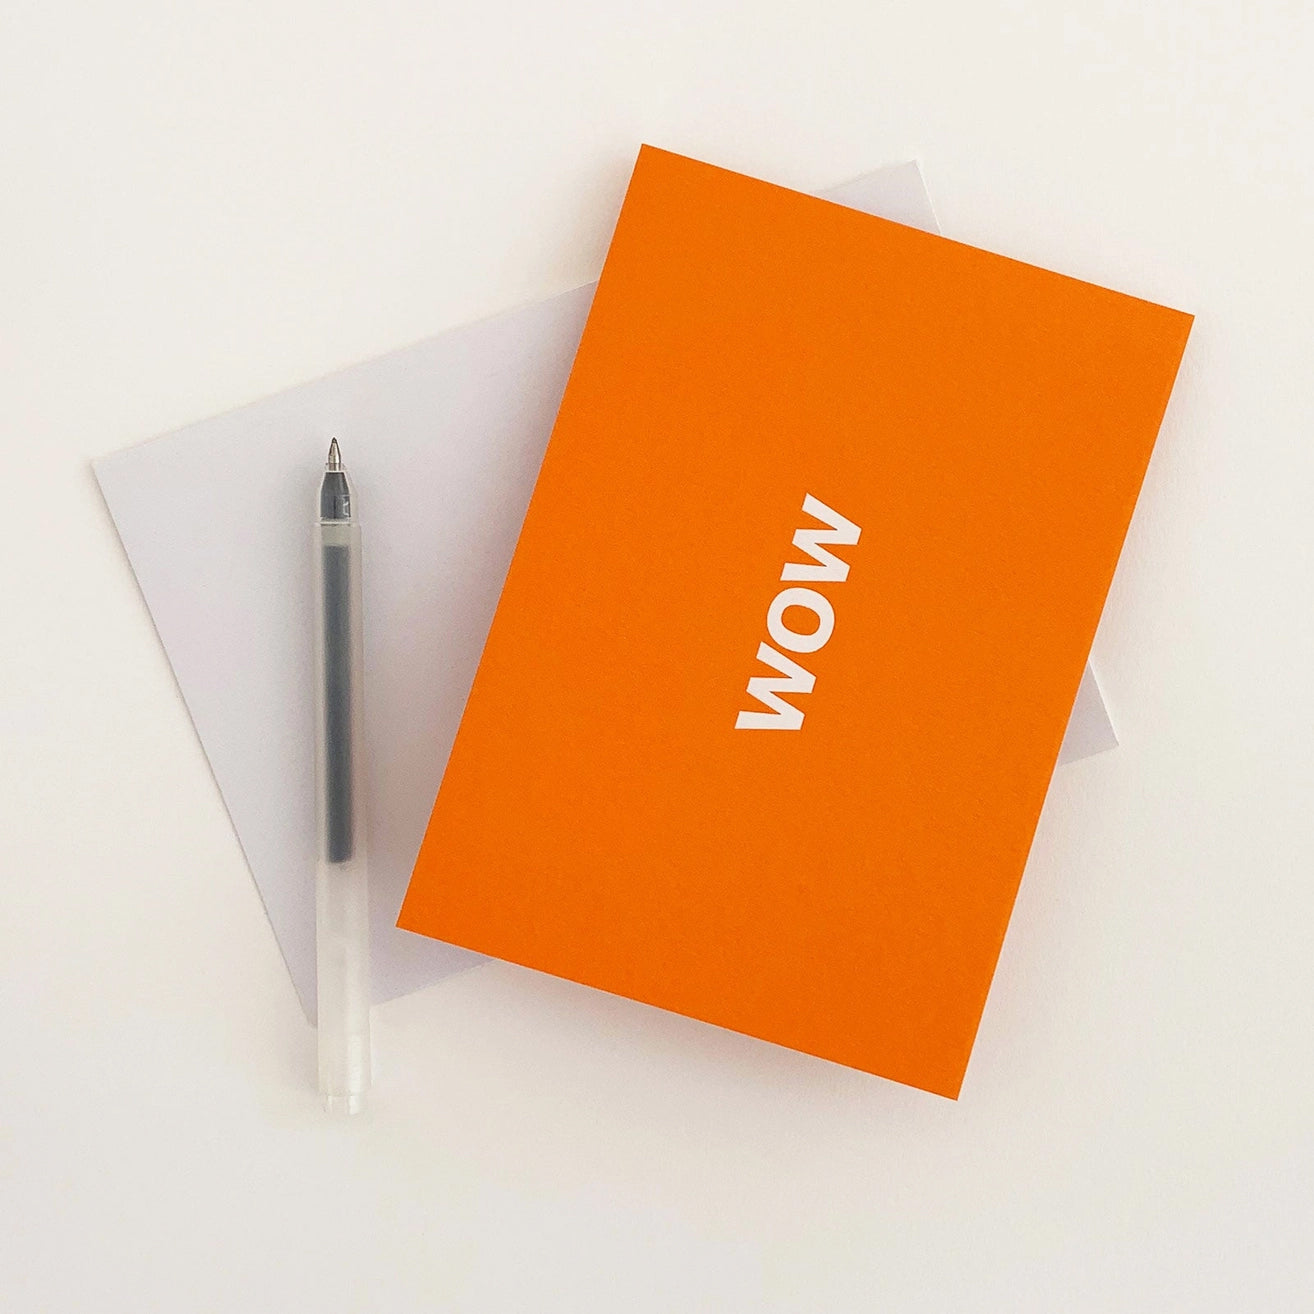 Wow Typographic Foiled Greetings Card